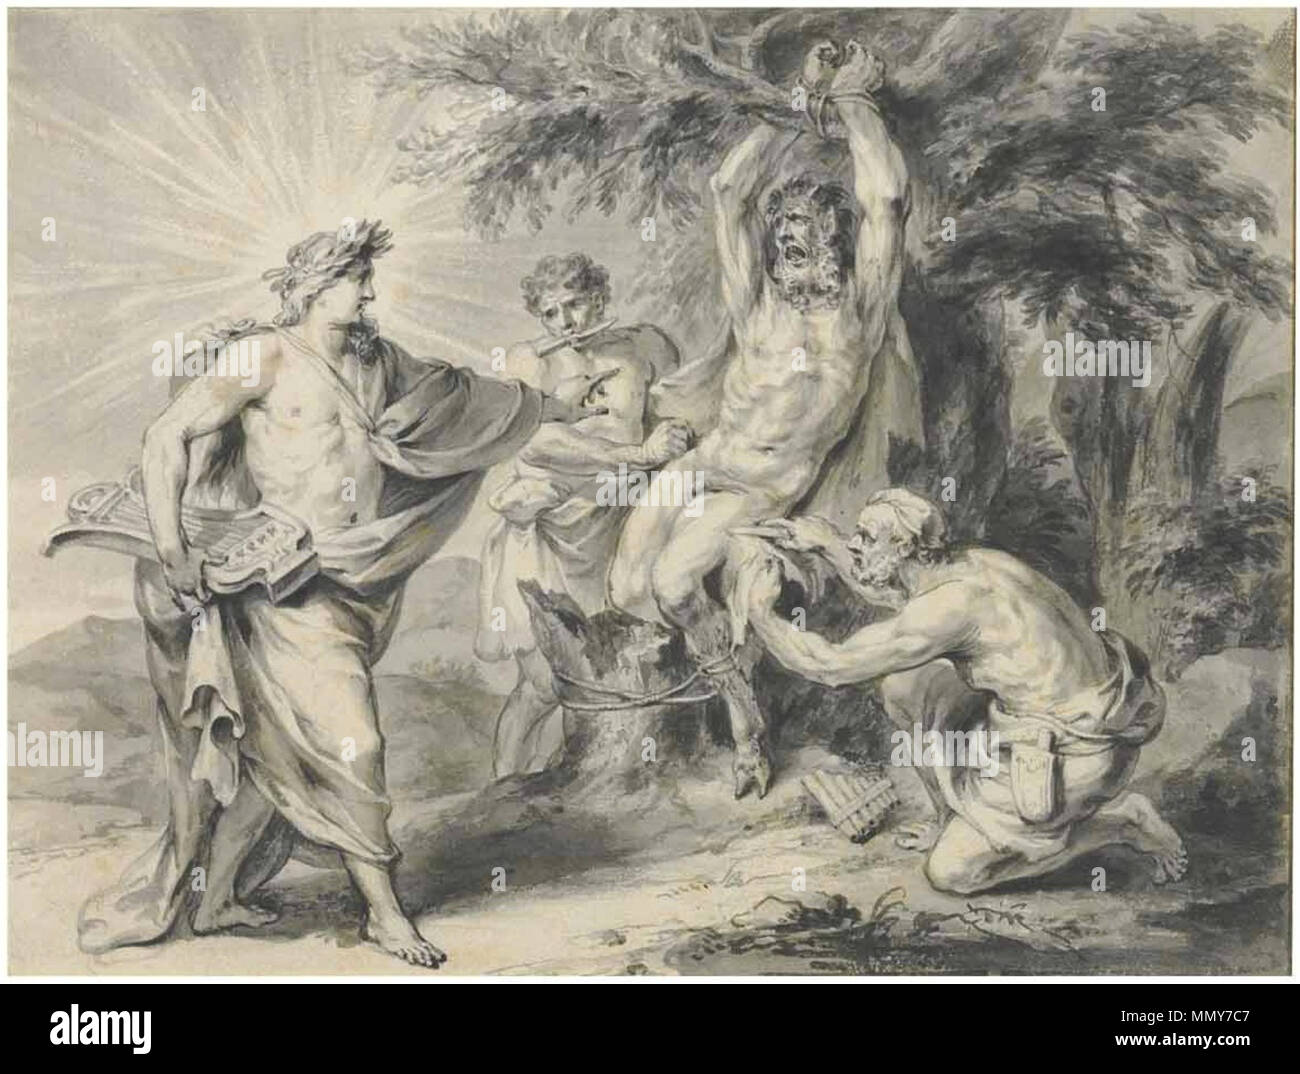 English: Illustrations to the Metamorphoses of Ovid, The Flaying of Marsyas . between 1664 and 1700. Godfried Maes - Illustrations to the Metamorphoses of Ovid, The Flaying of Marsyas Stock Photo